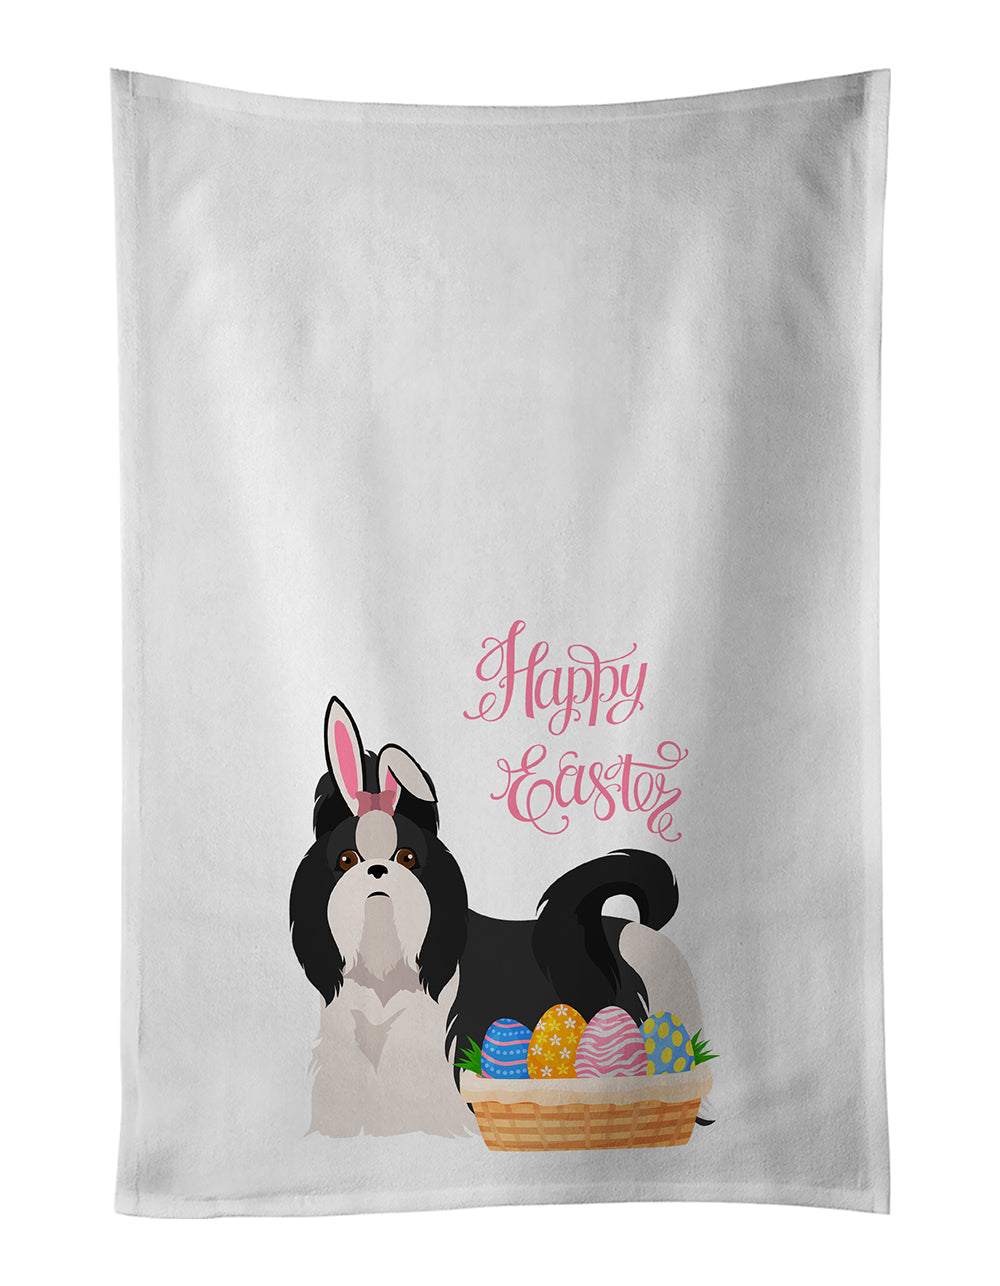 Buy this Black and White Shih Tzu Easter White Kitchen Towel Set of 2 Dish Towels